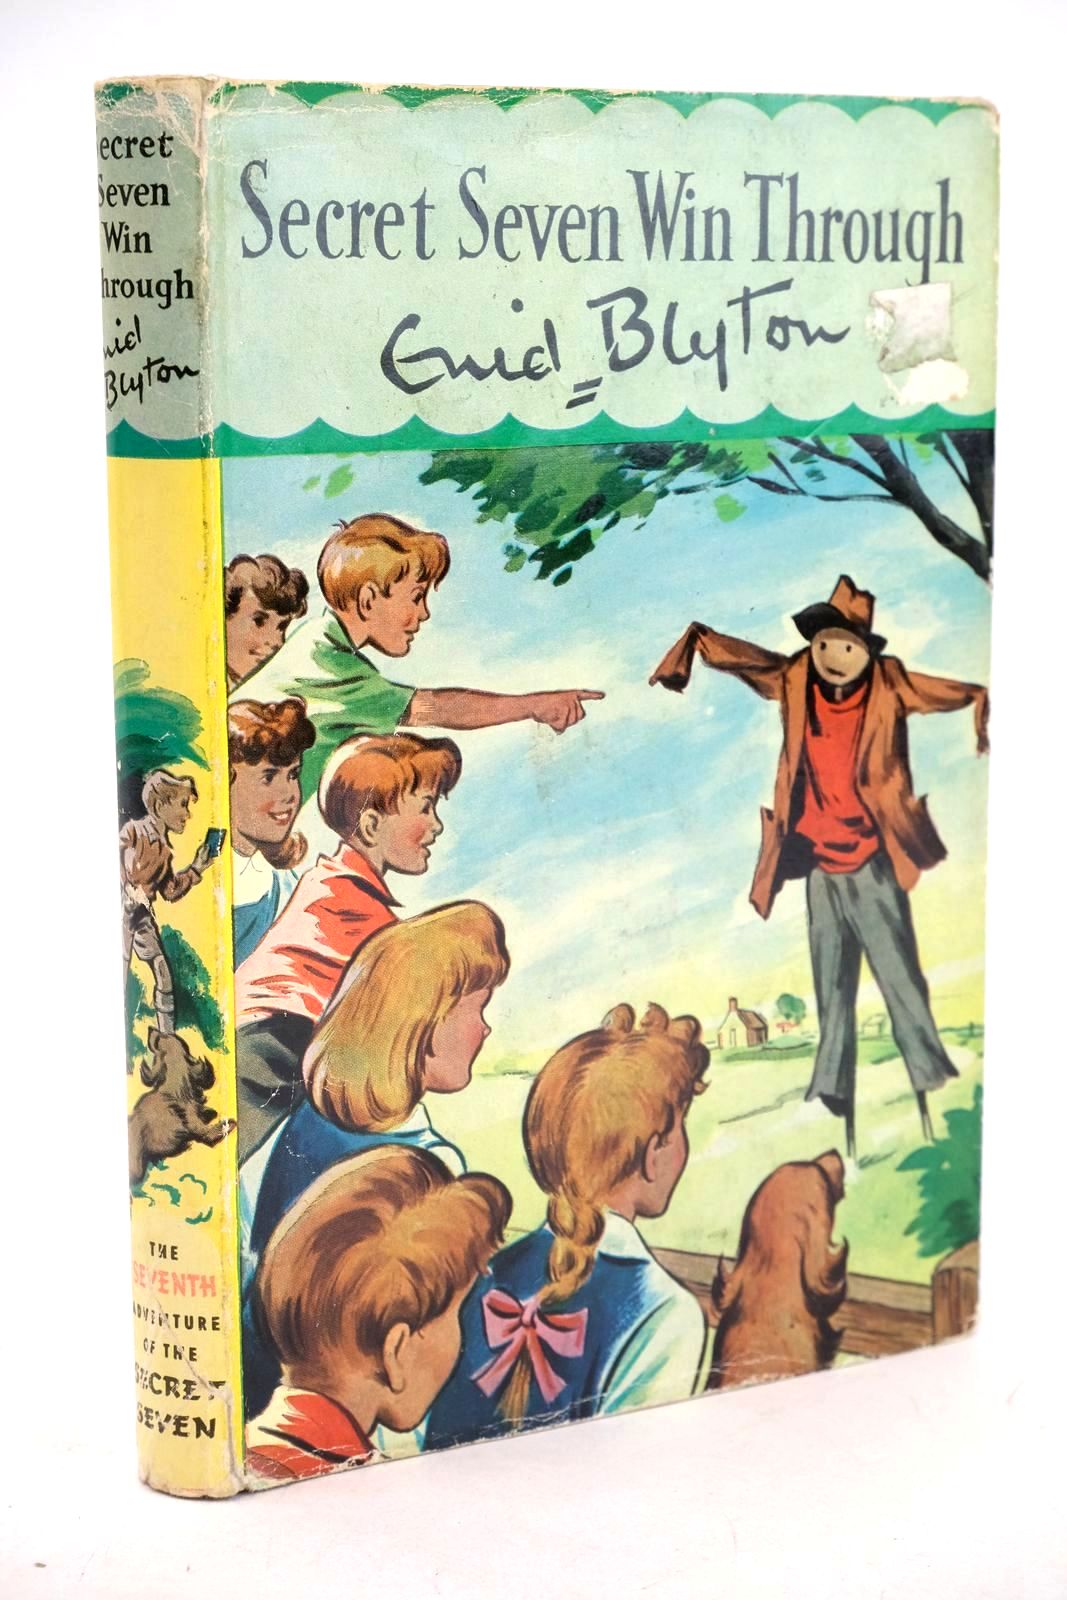 Photo of SECRET SEVEN WIN THROUGH written by Blyton, Enid illustrated by Kay, Bruno published by Brockhampton Press Ltd. (STOCK CODE: 1326865)  for sale by Stella & Rose's Books